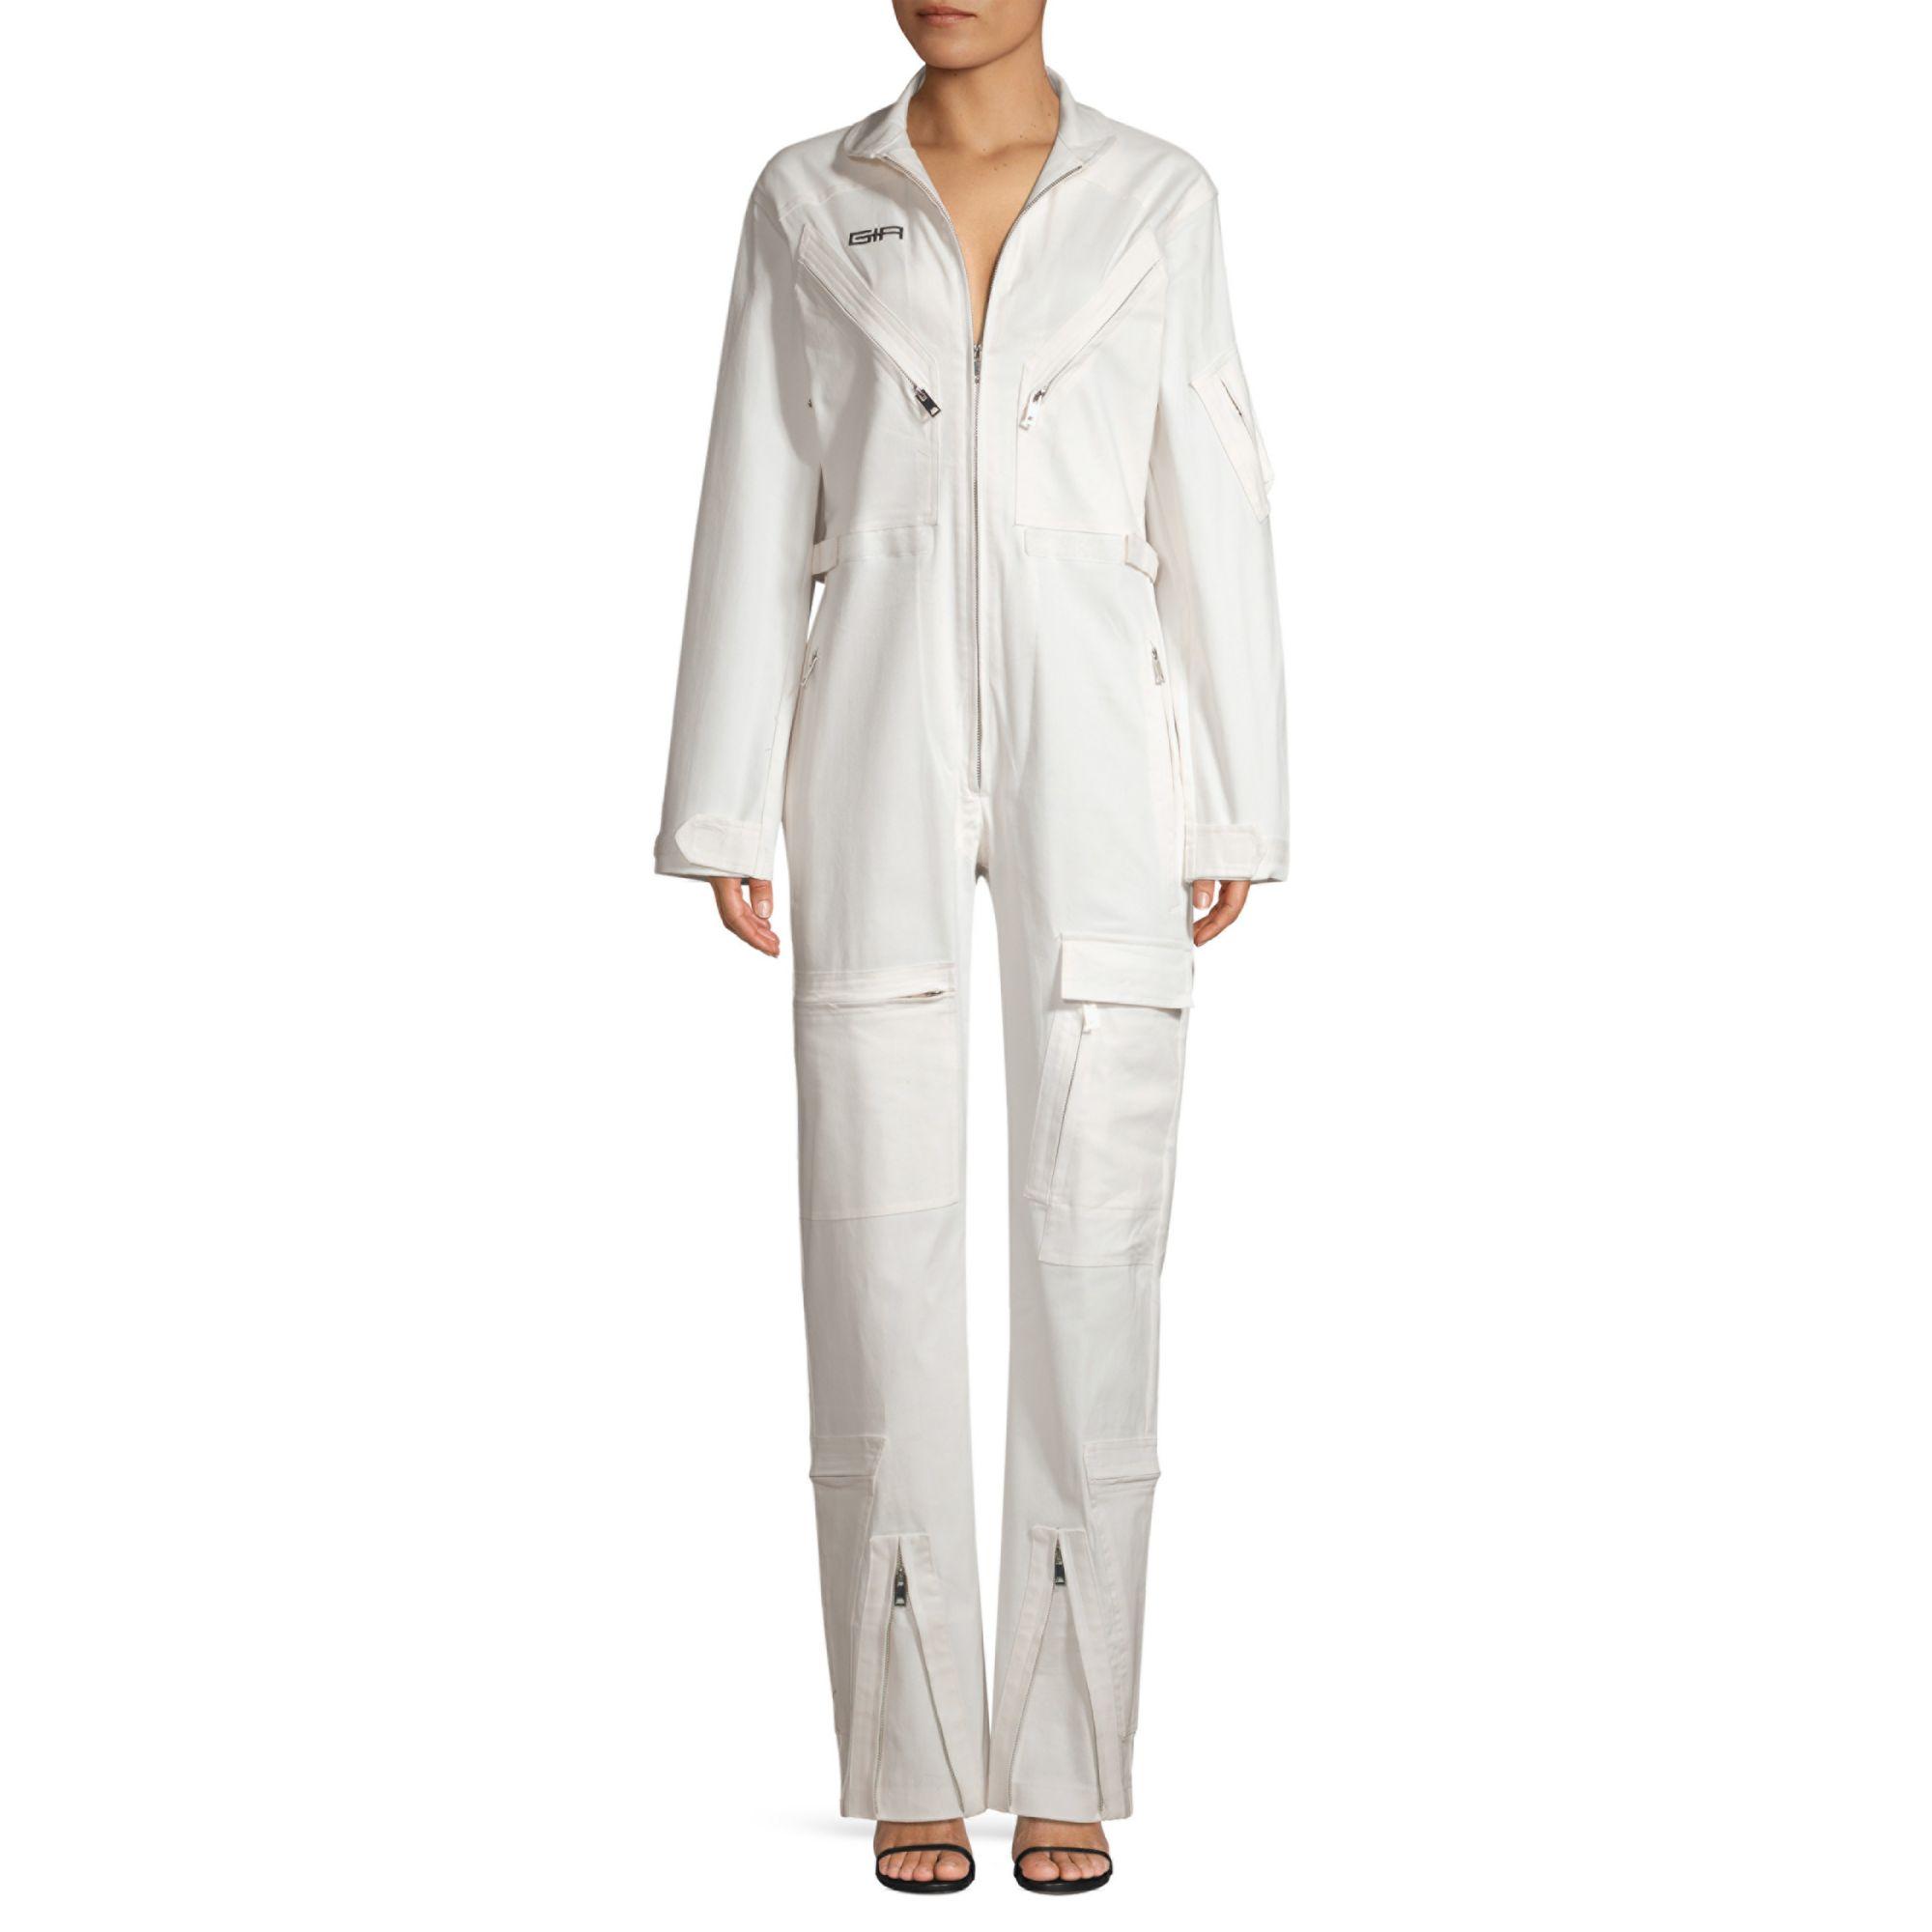 I.AM.GIA Synthetic I.am. Gia Neo Noir Boiler Zip Flight Suit in White - Lyst